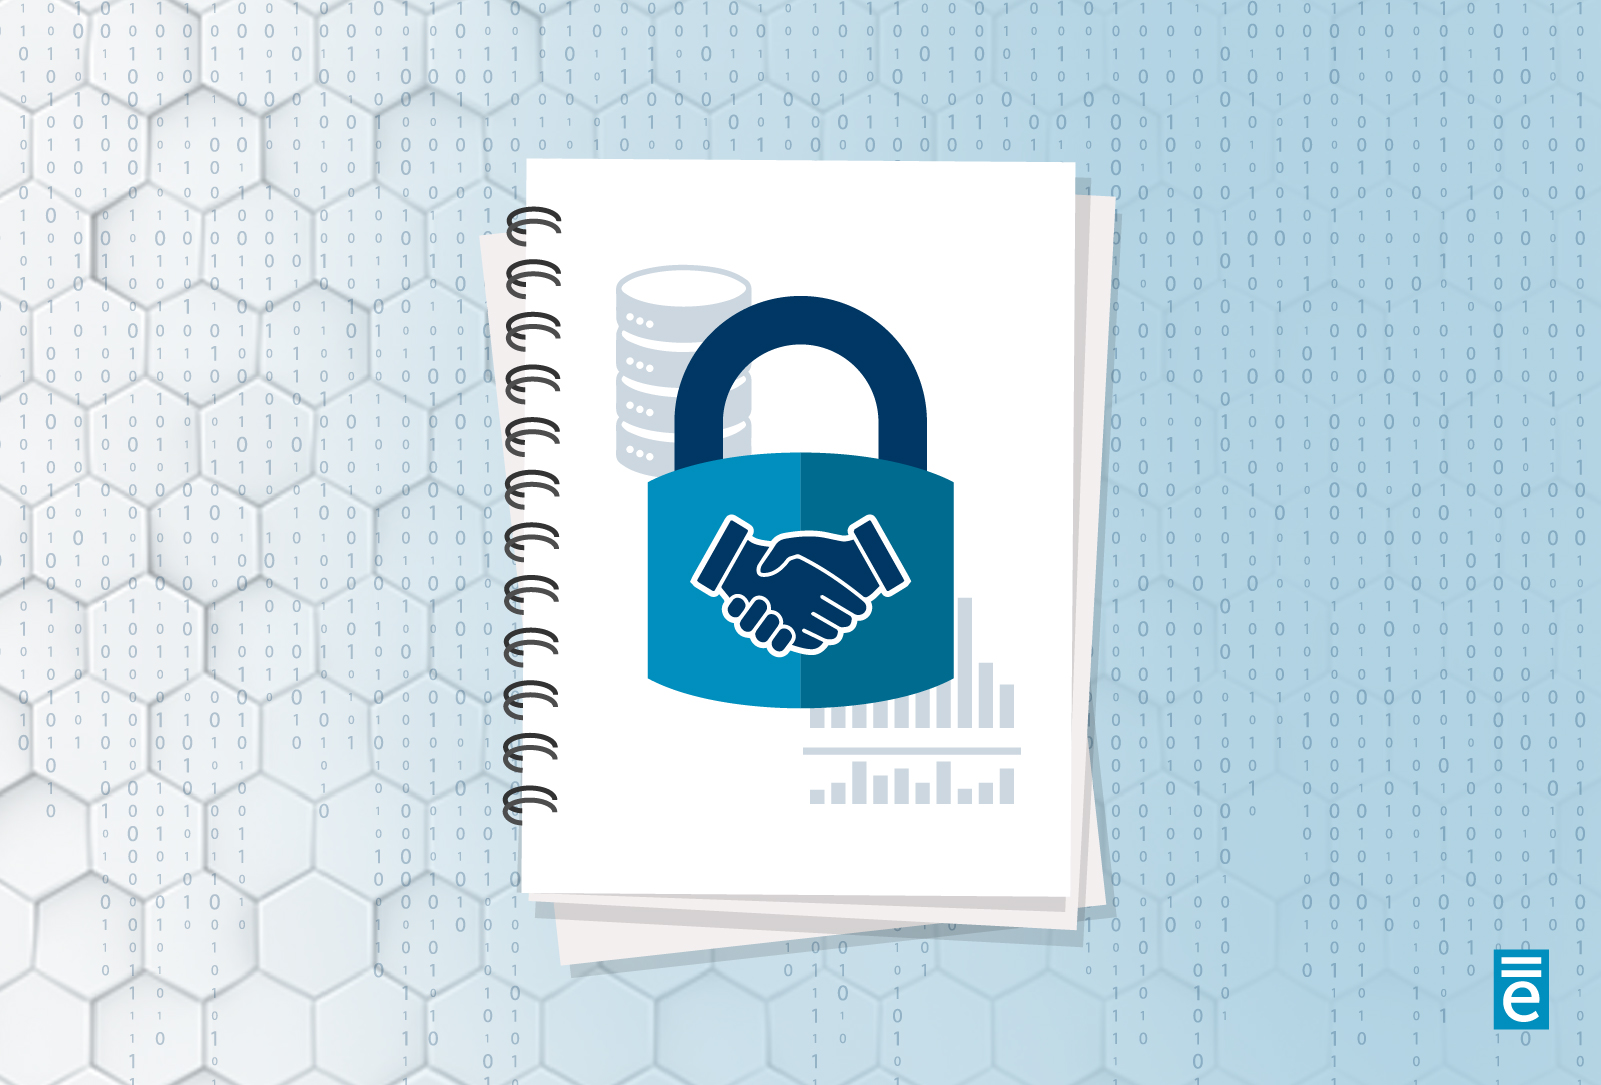 How-To Guide: Building a Data Trust Agreement